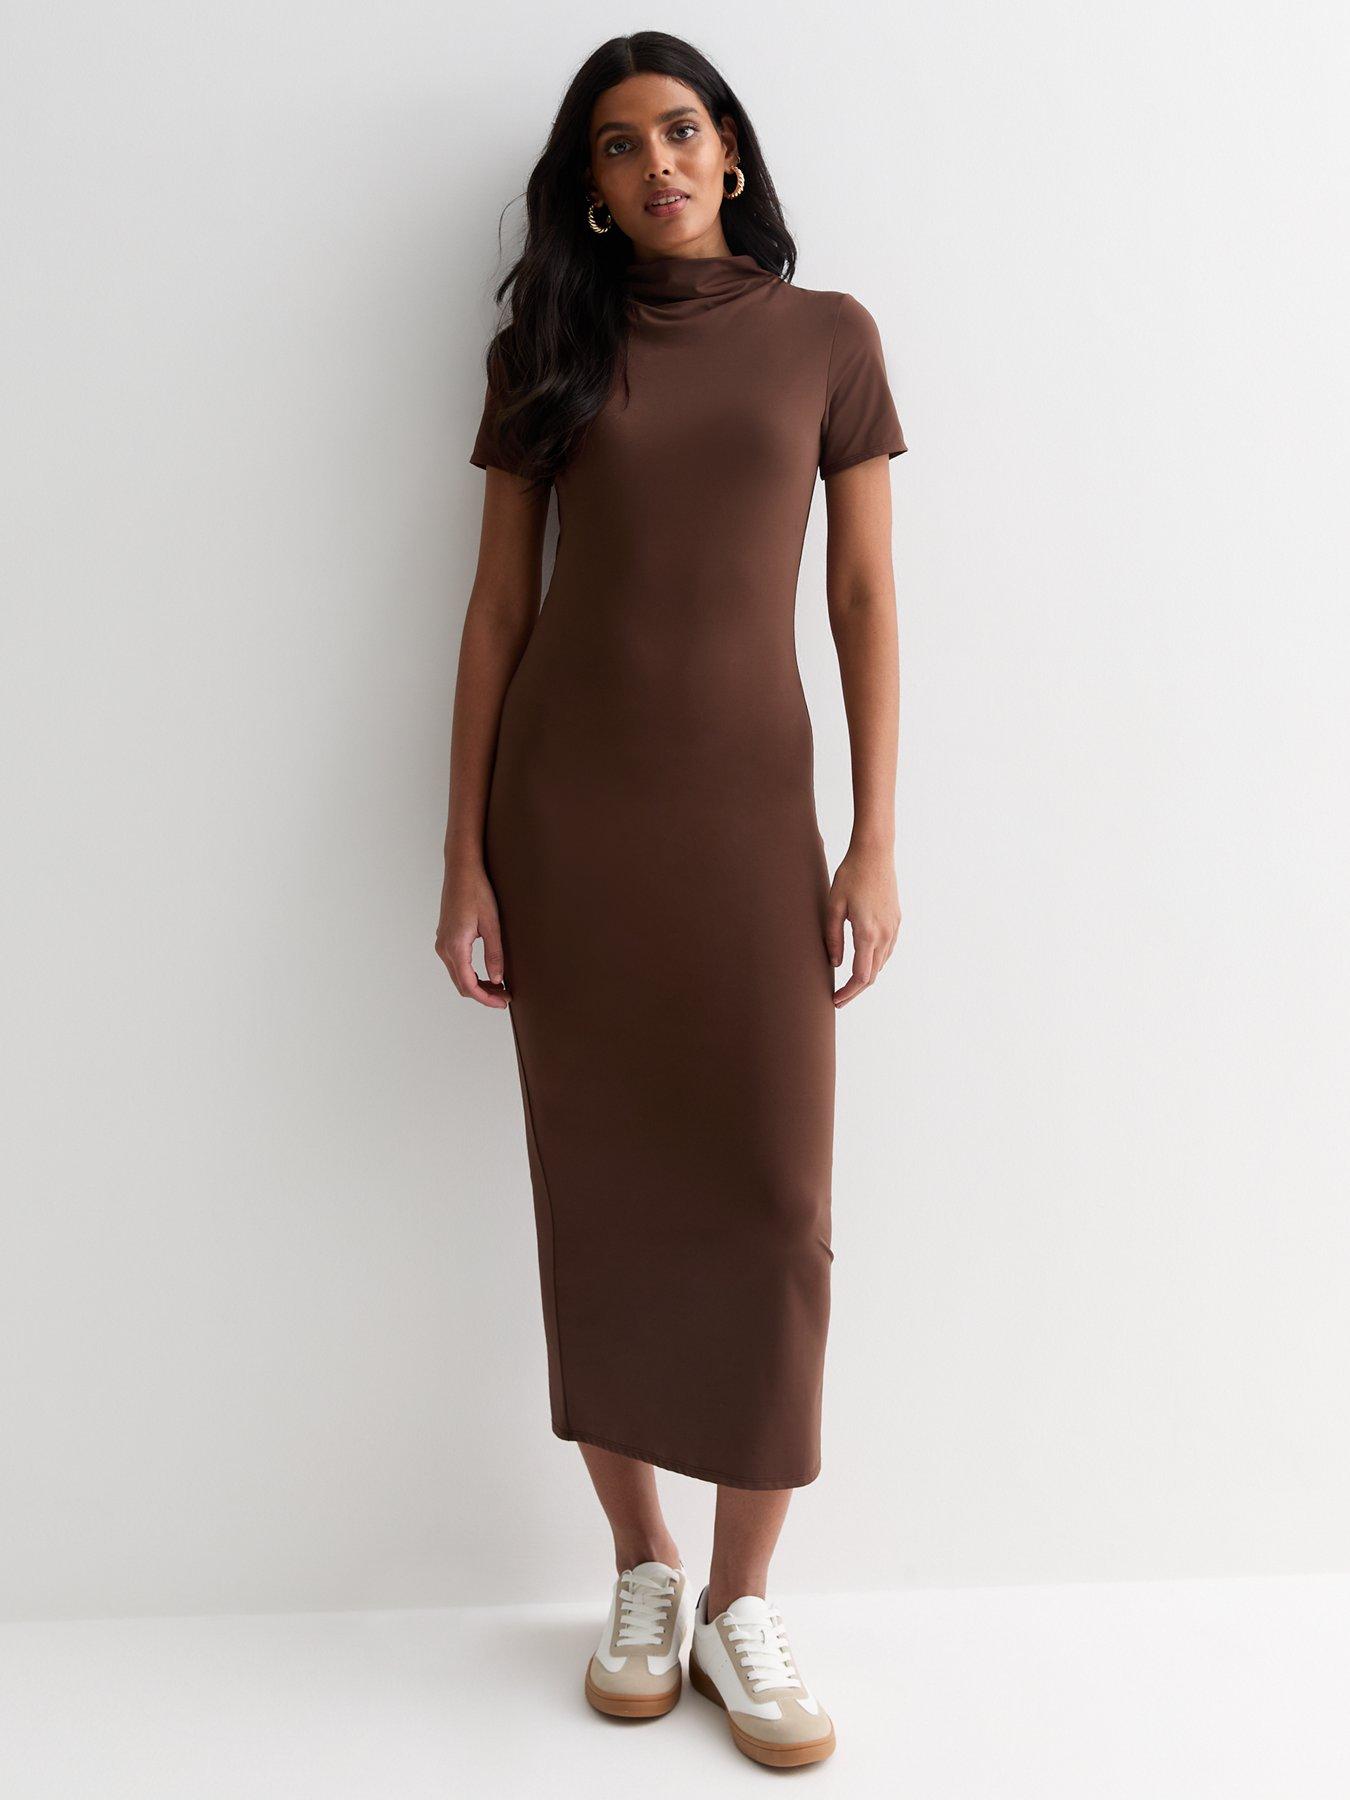 Brown, This Month, Dresses, Women